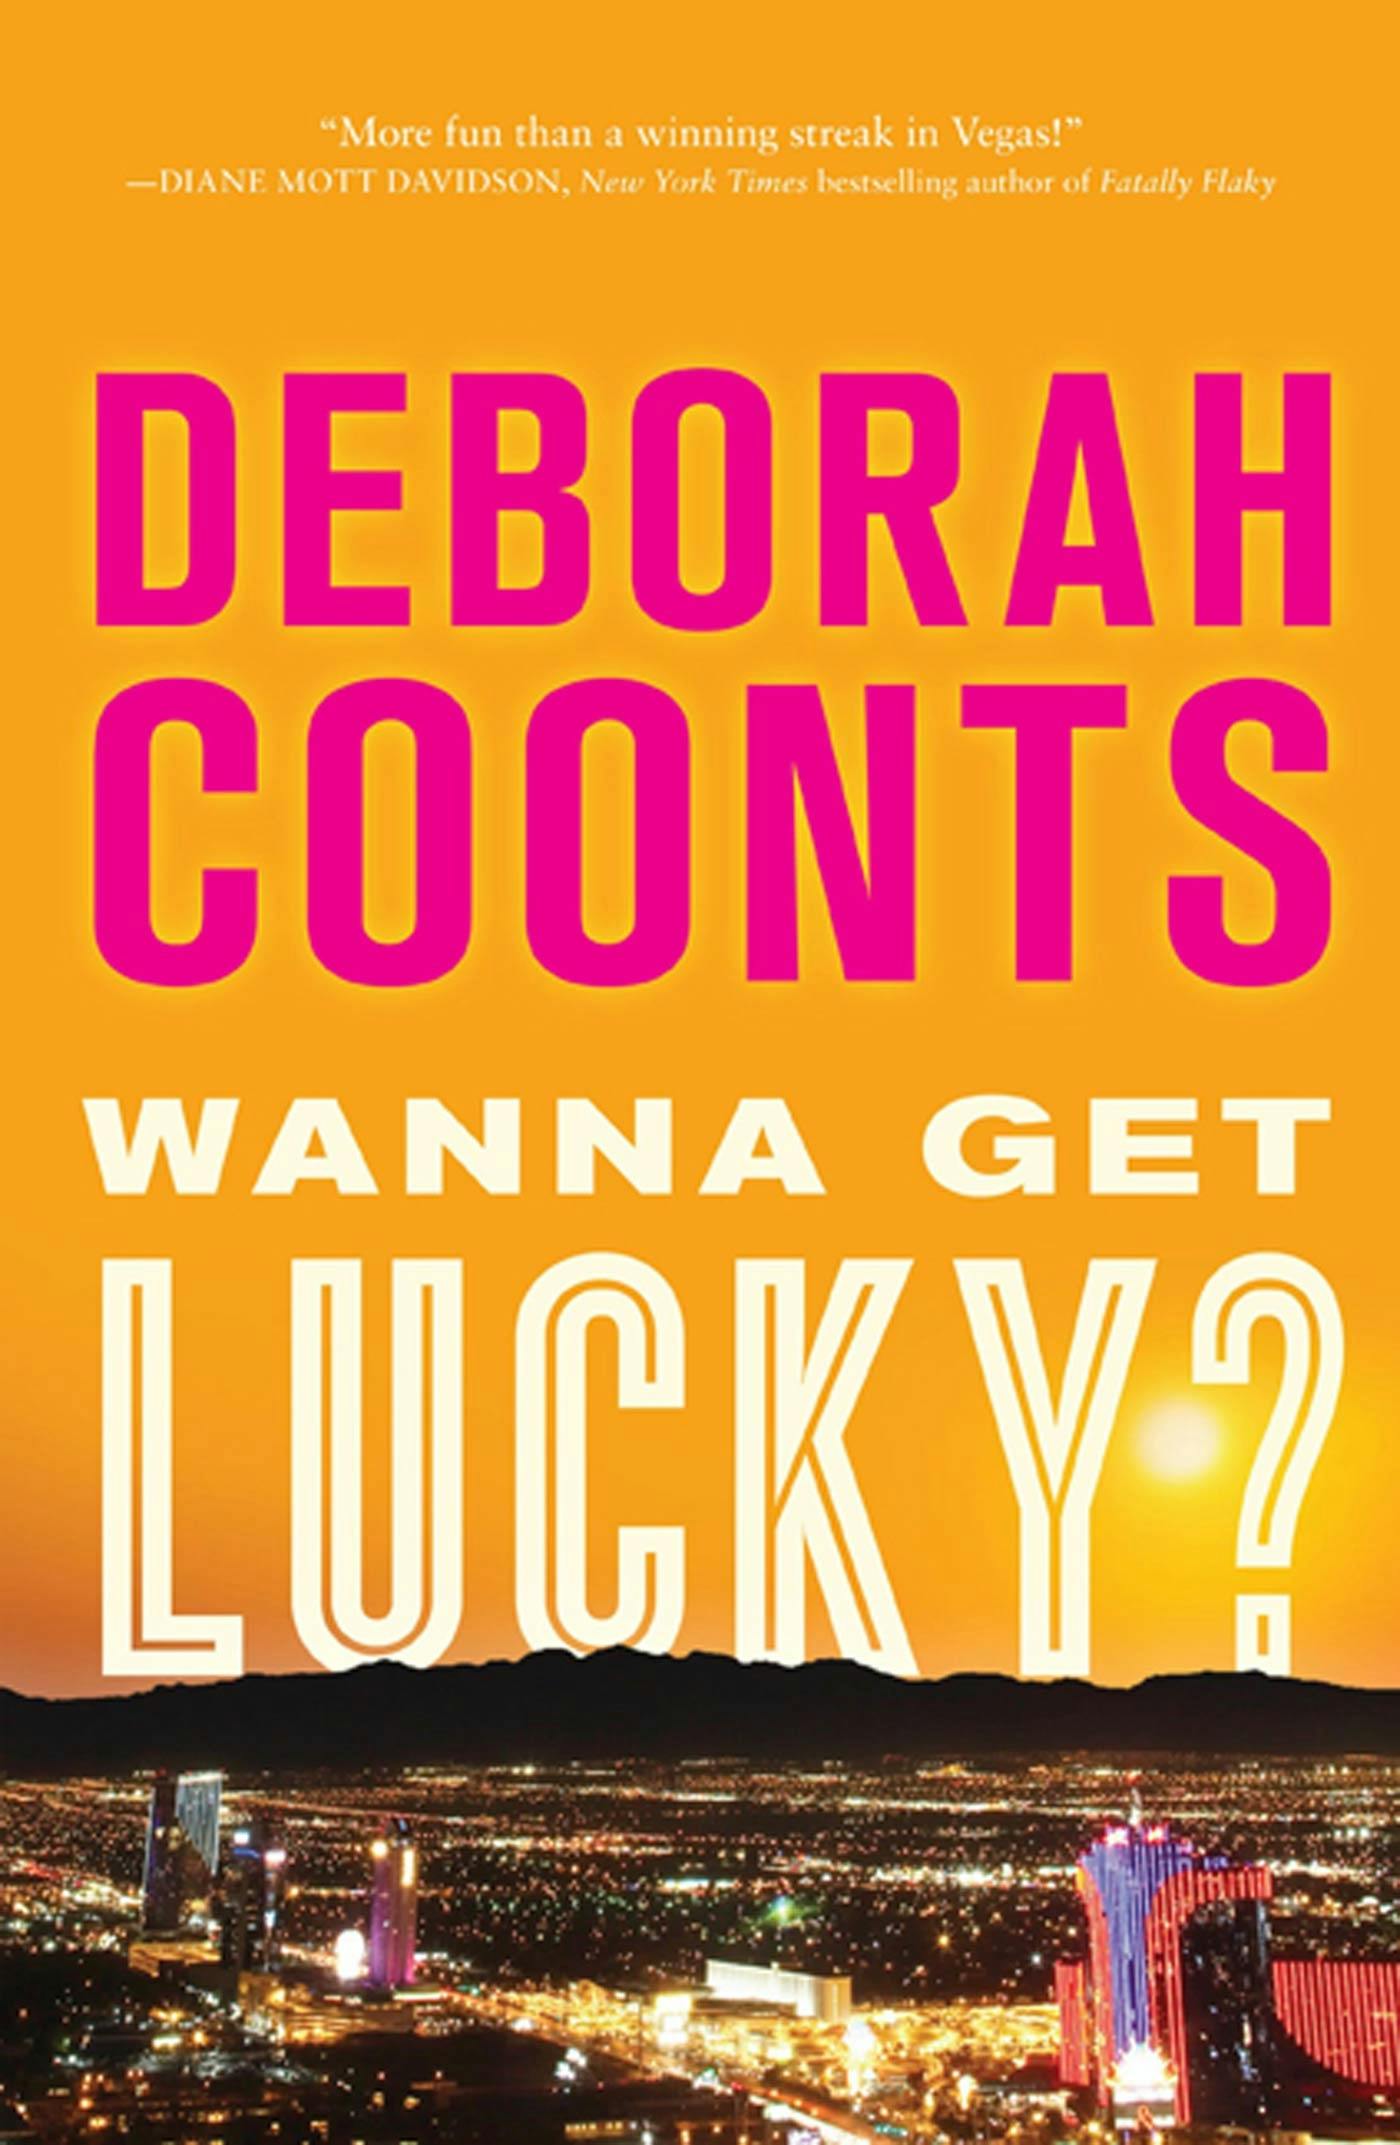 Cover for the book titled as: Wanna Get Lucky?